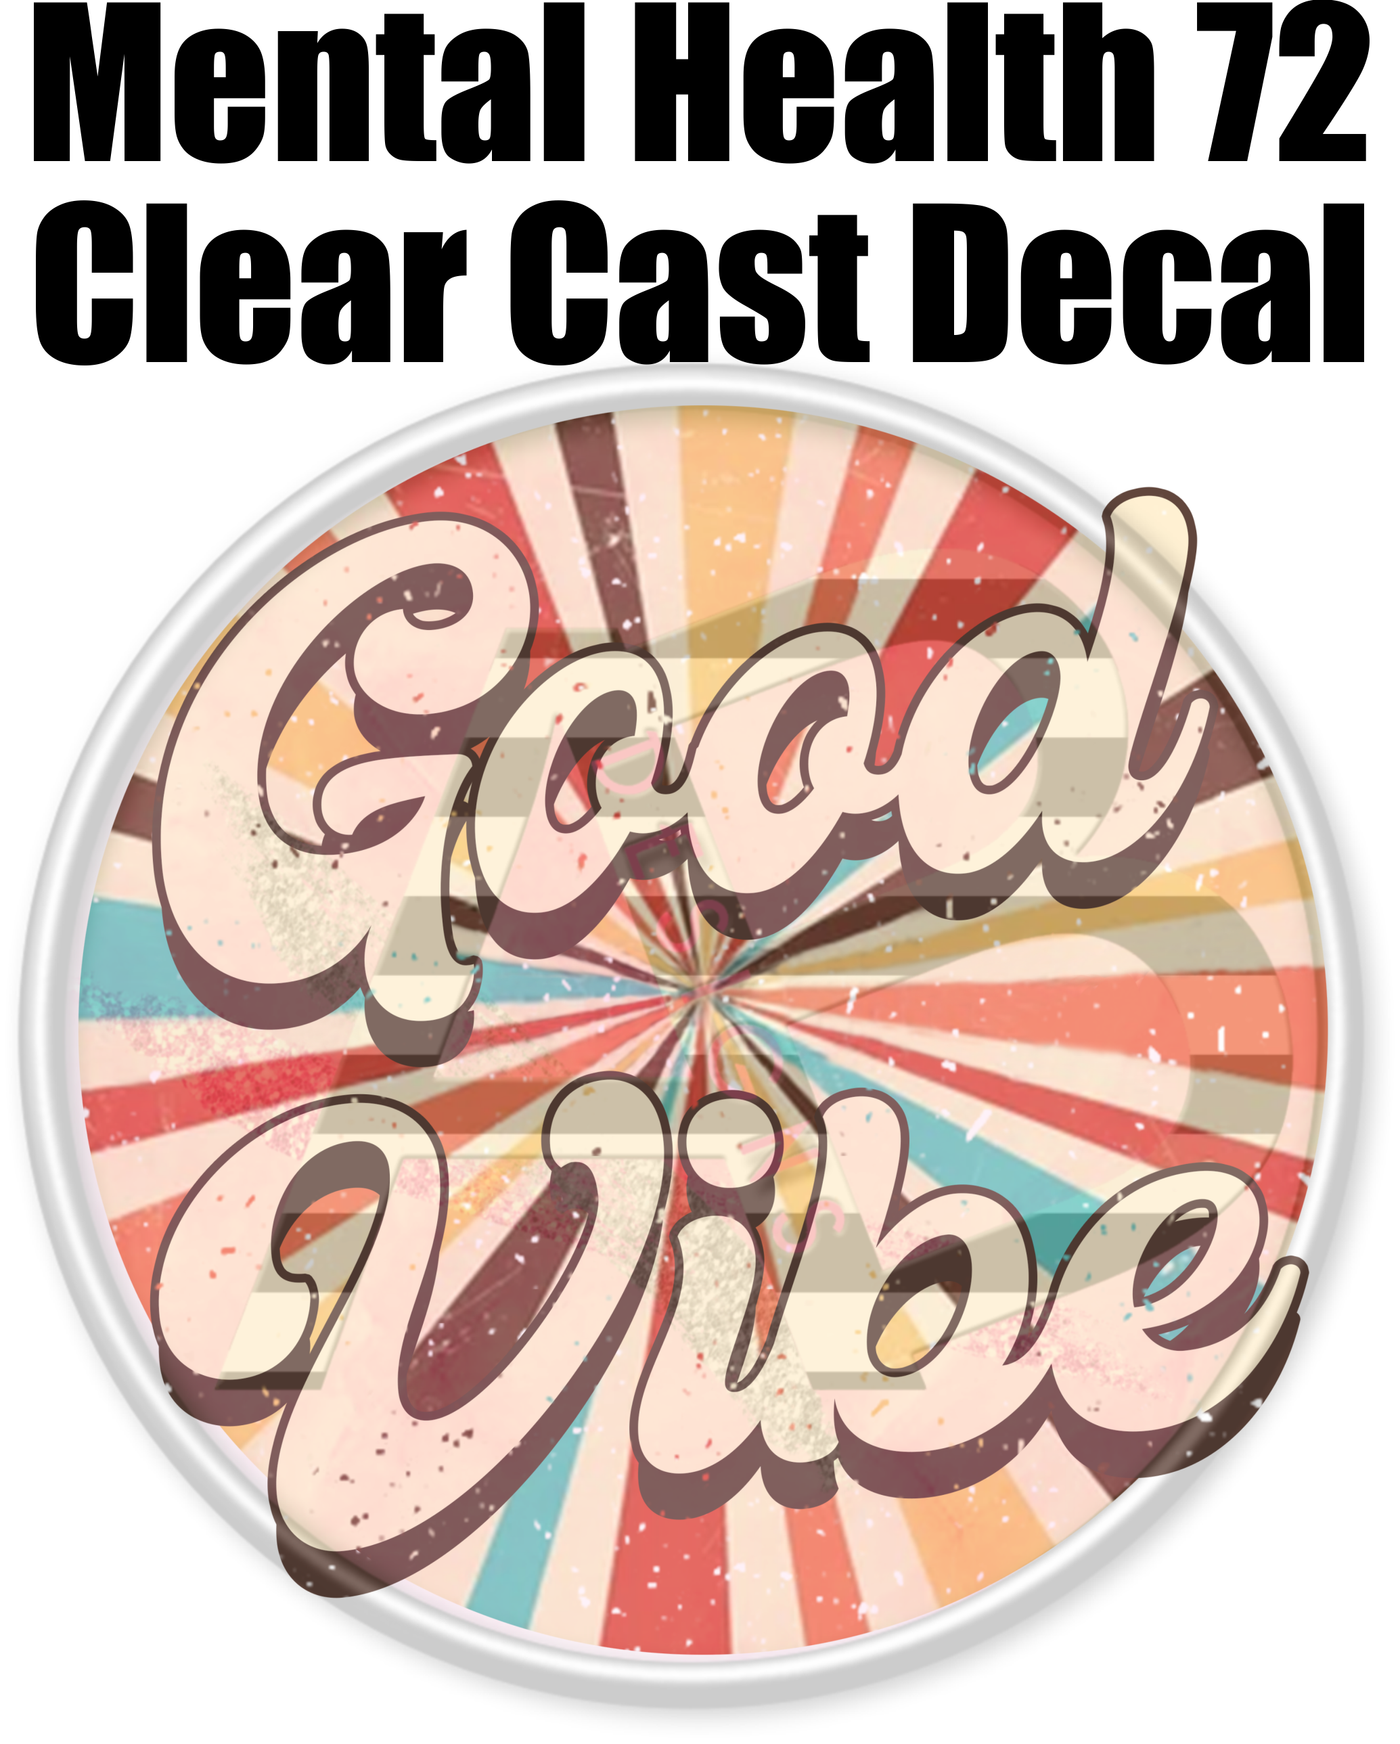 Mental Health 72 - Clear Cast Decal-456